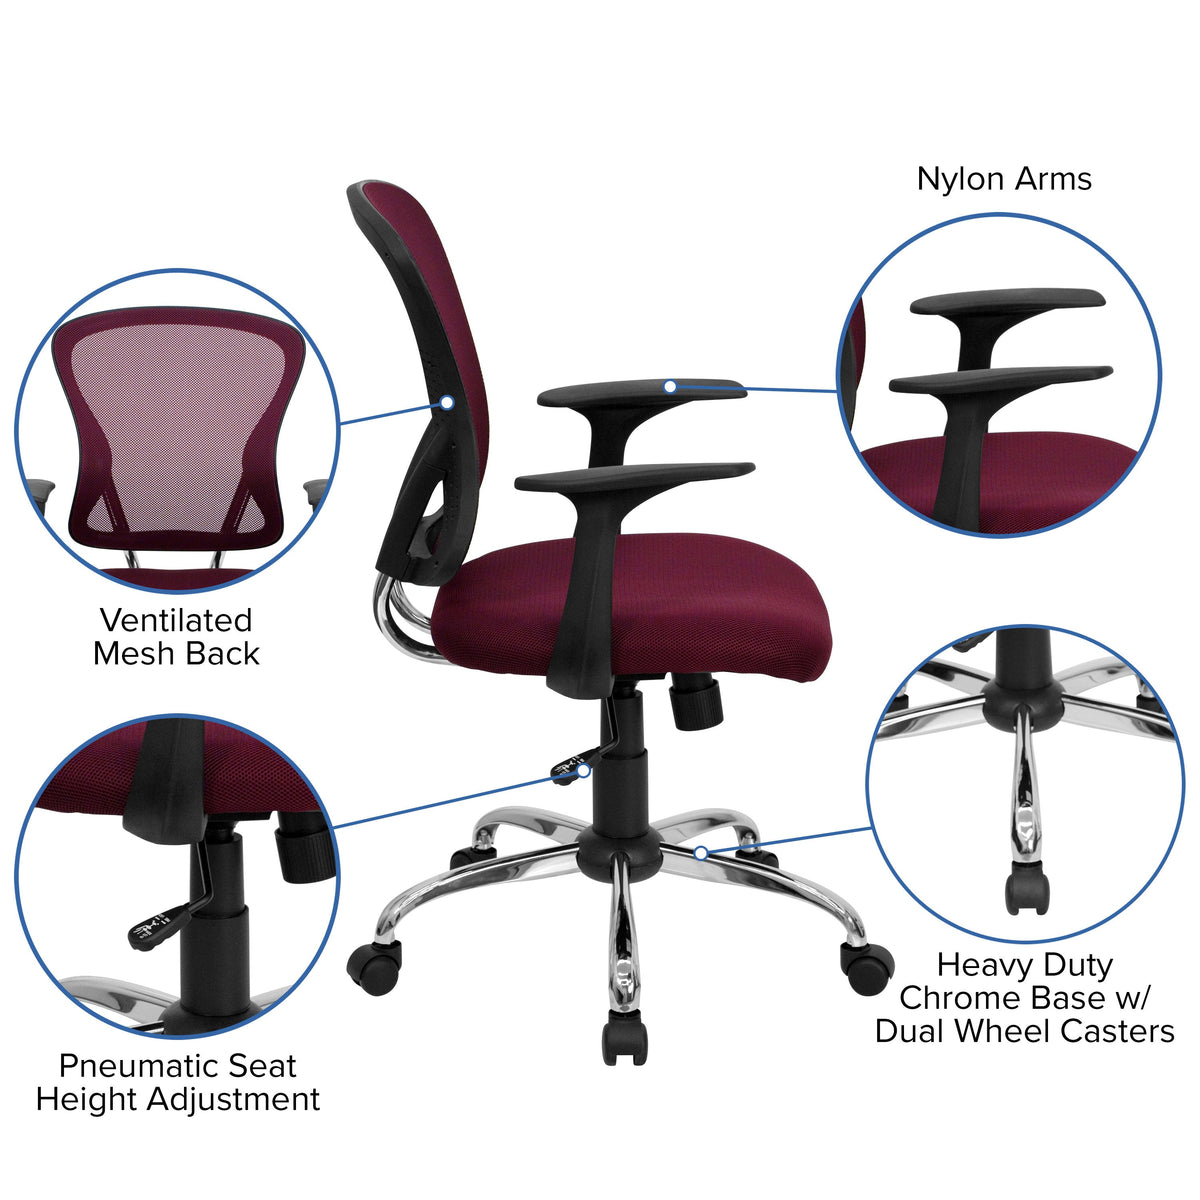 Burgundy |#| Mid-Back Burgundy Mesh Swivel Task Office Chair with Chrome Base and Arms